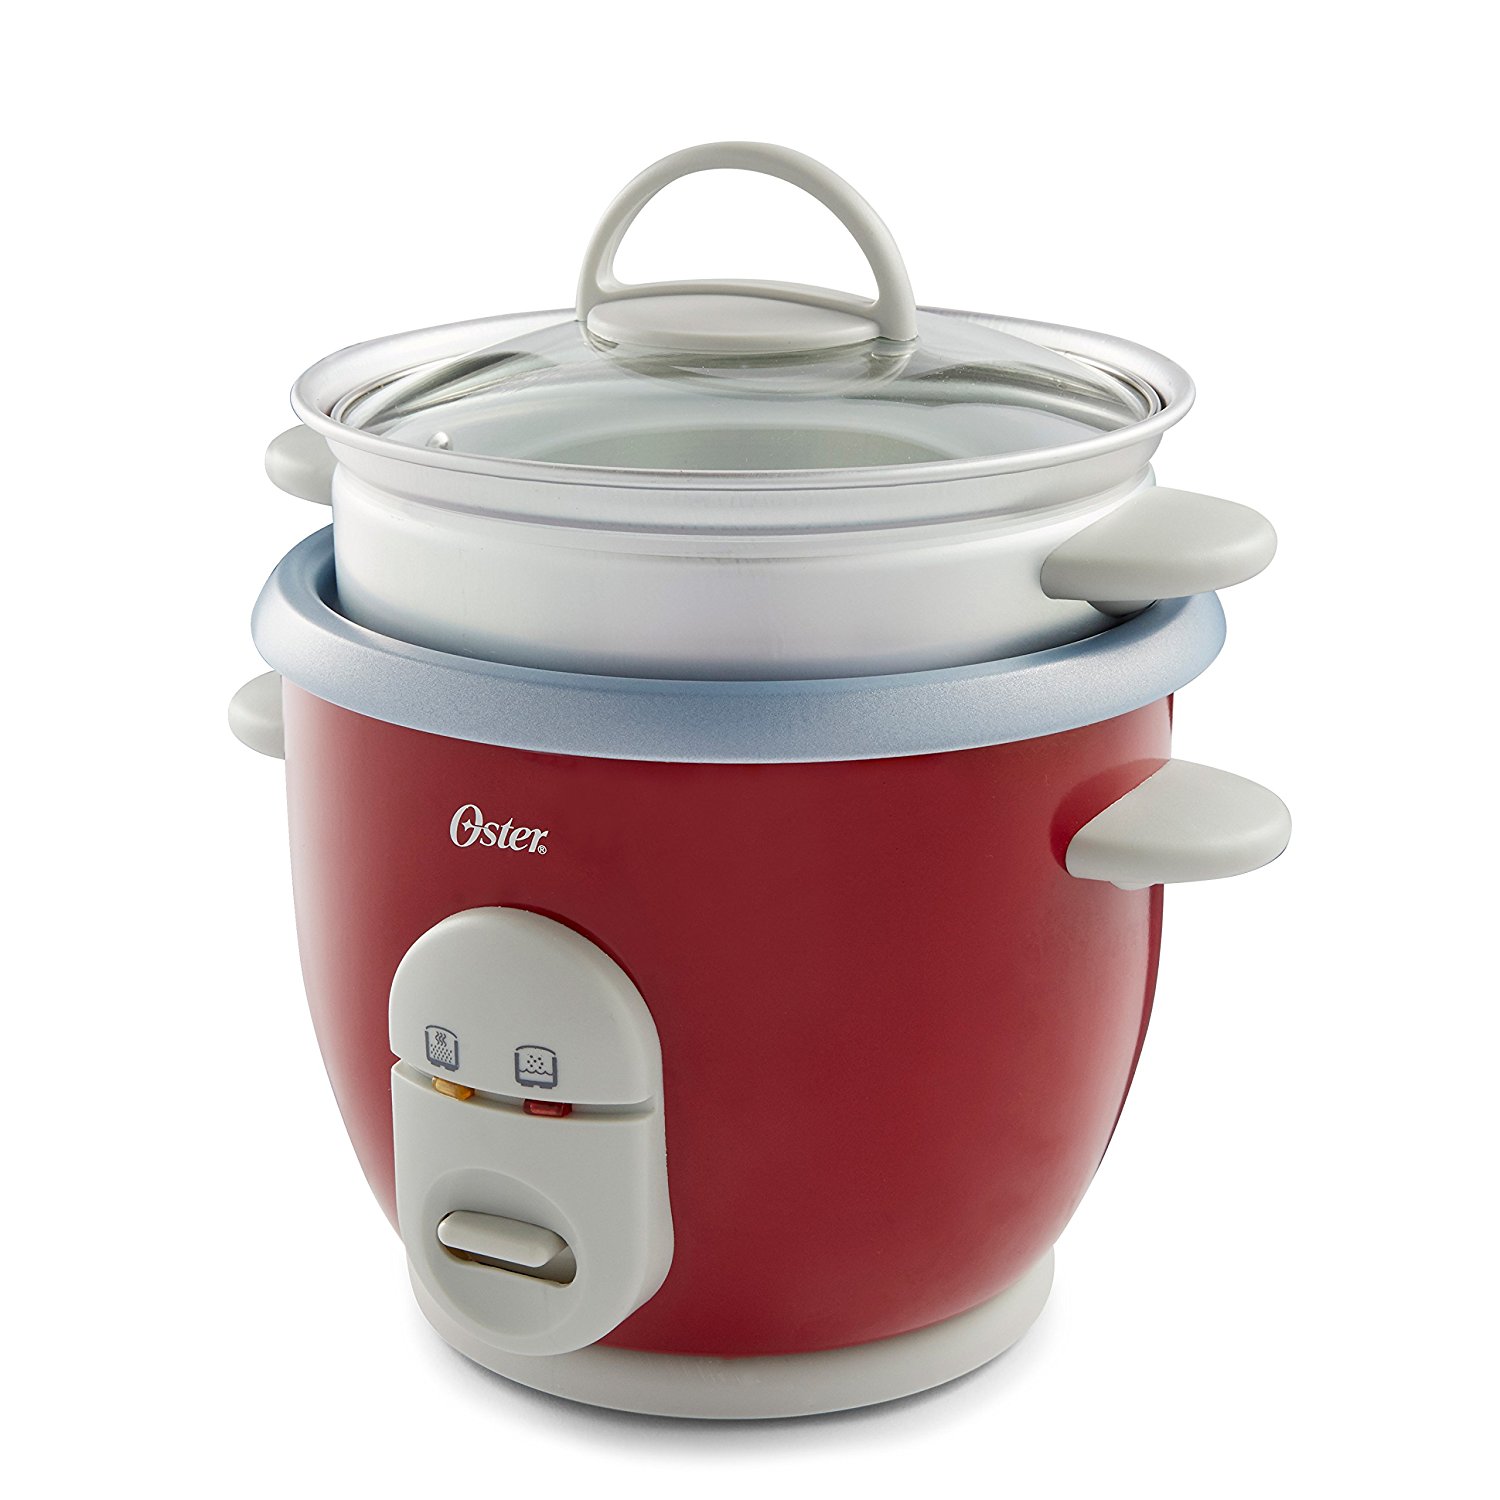 Oster 6-Cup Rice Cooker and Steamer, 4722 - image 4 of 6